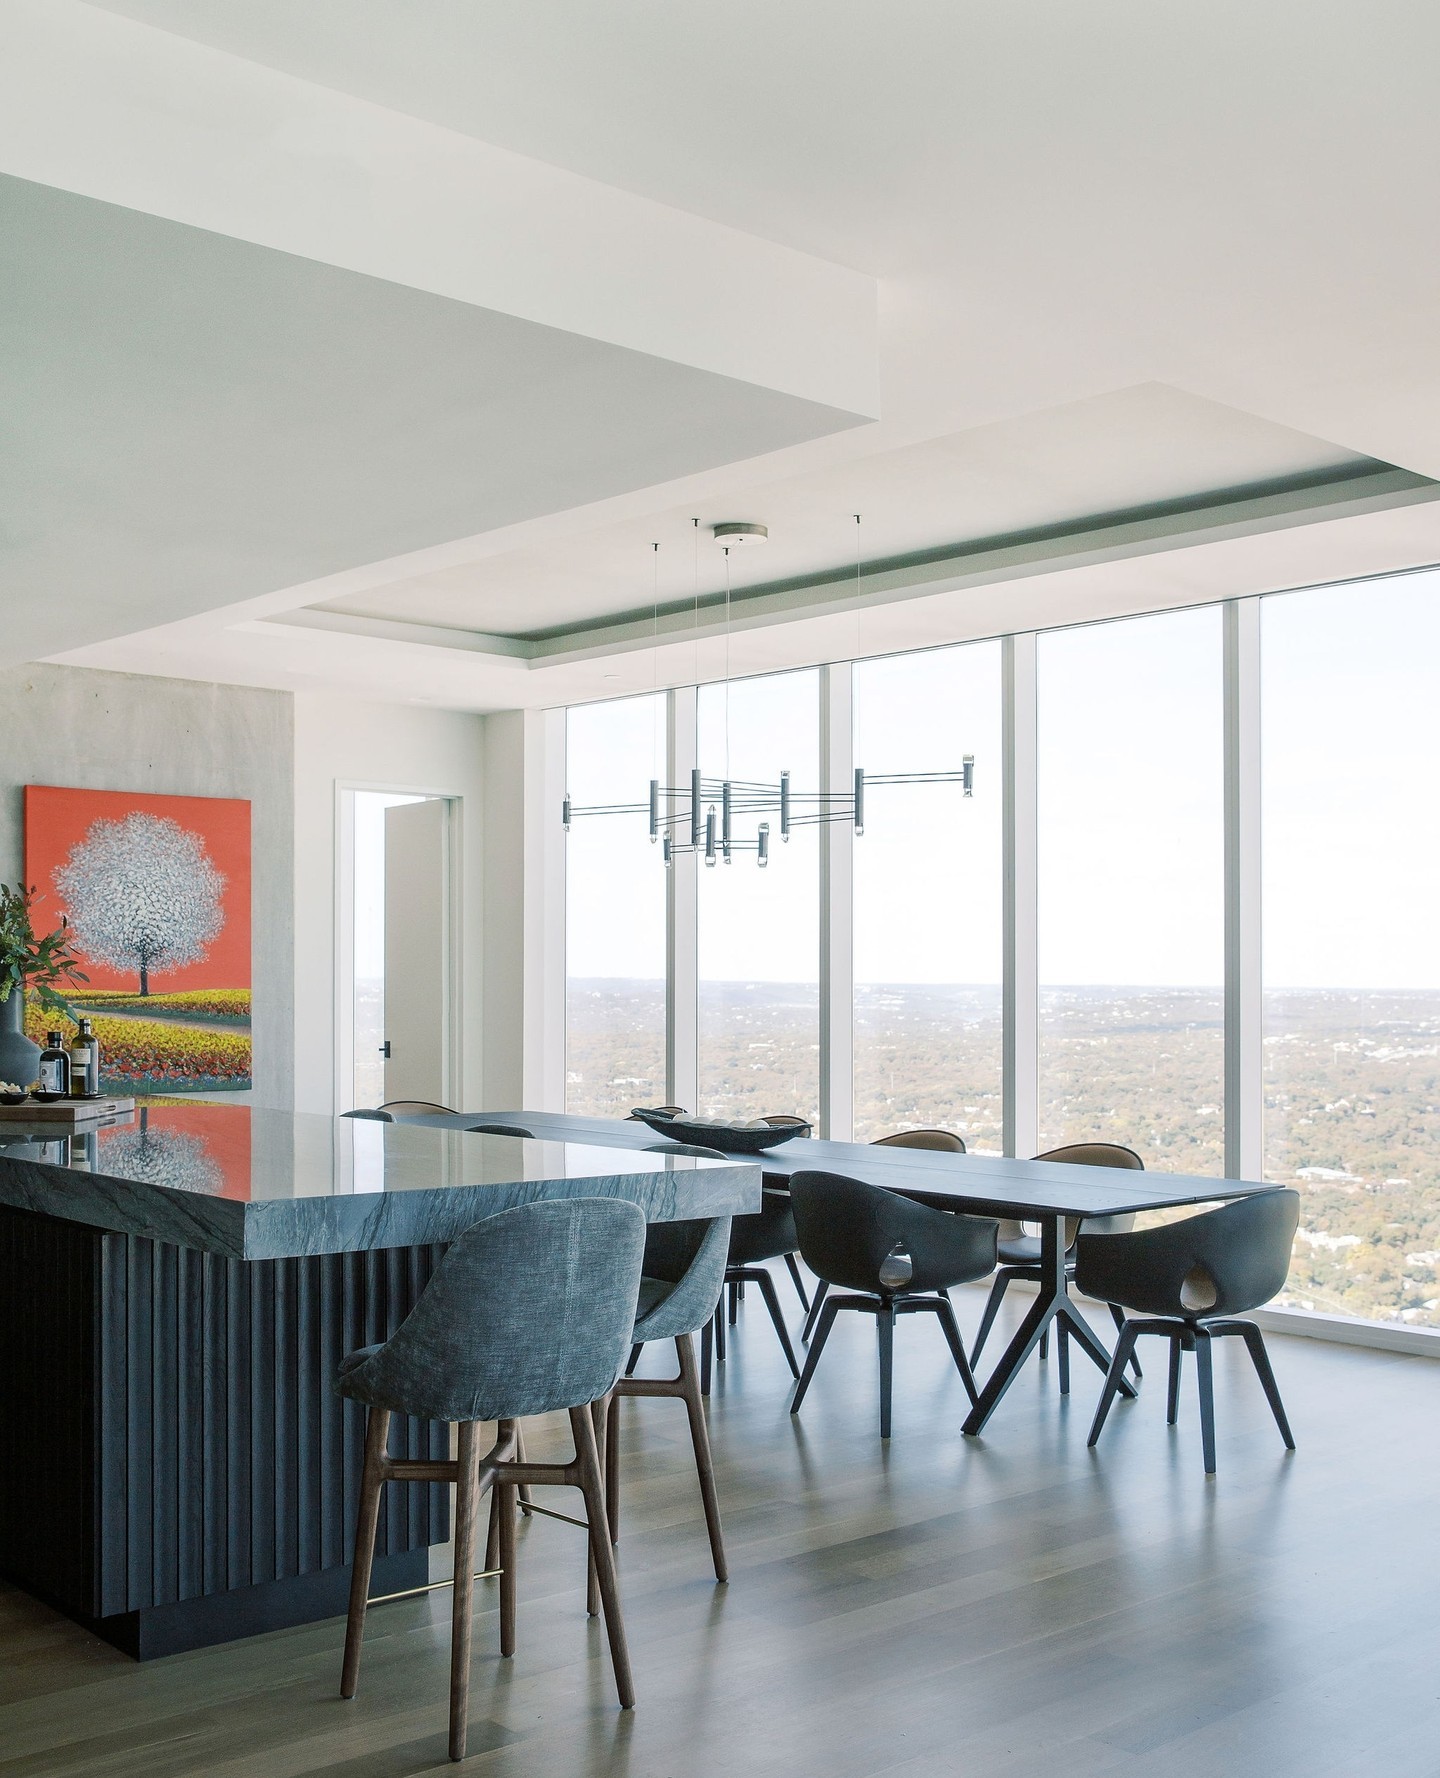 Feeling on top of the world! 🏙️ This kitchen and dining ara allows you to indulge in the ultimate dining experience with breathtaking views of Austin. ⁠
⁠
#RooftopViews⁠
⁠
@urbanspaceinteriors⁠
@theindependentaustin⁠
⁠
⁠